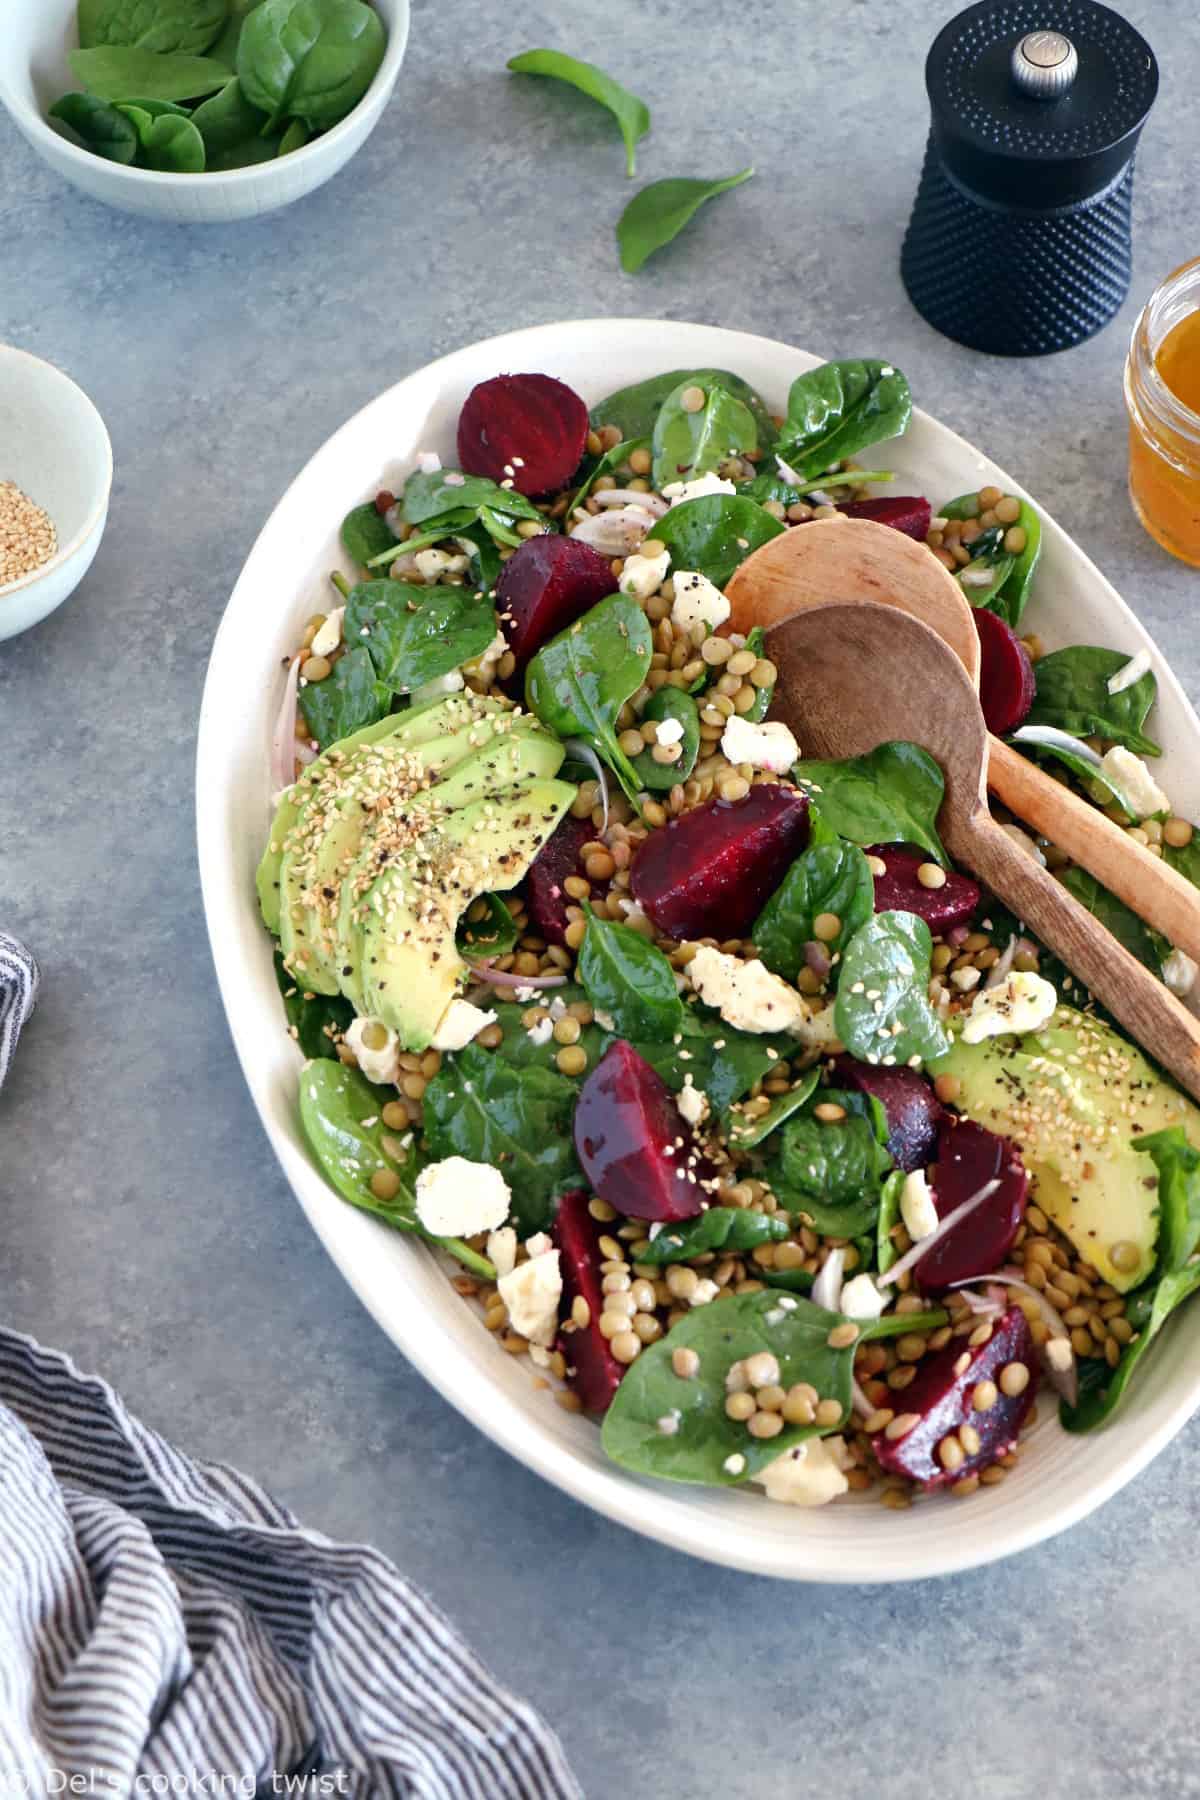 French lentil salad with beets, baby spinach and feta cheese is a nourishing healthy winter salad recipe, naturally gluten-free and easy to make.